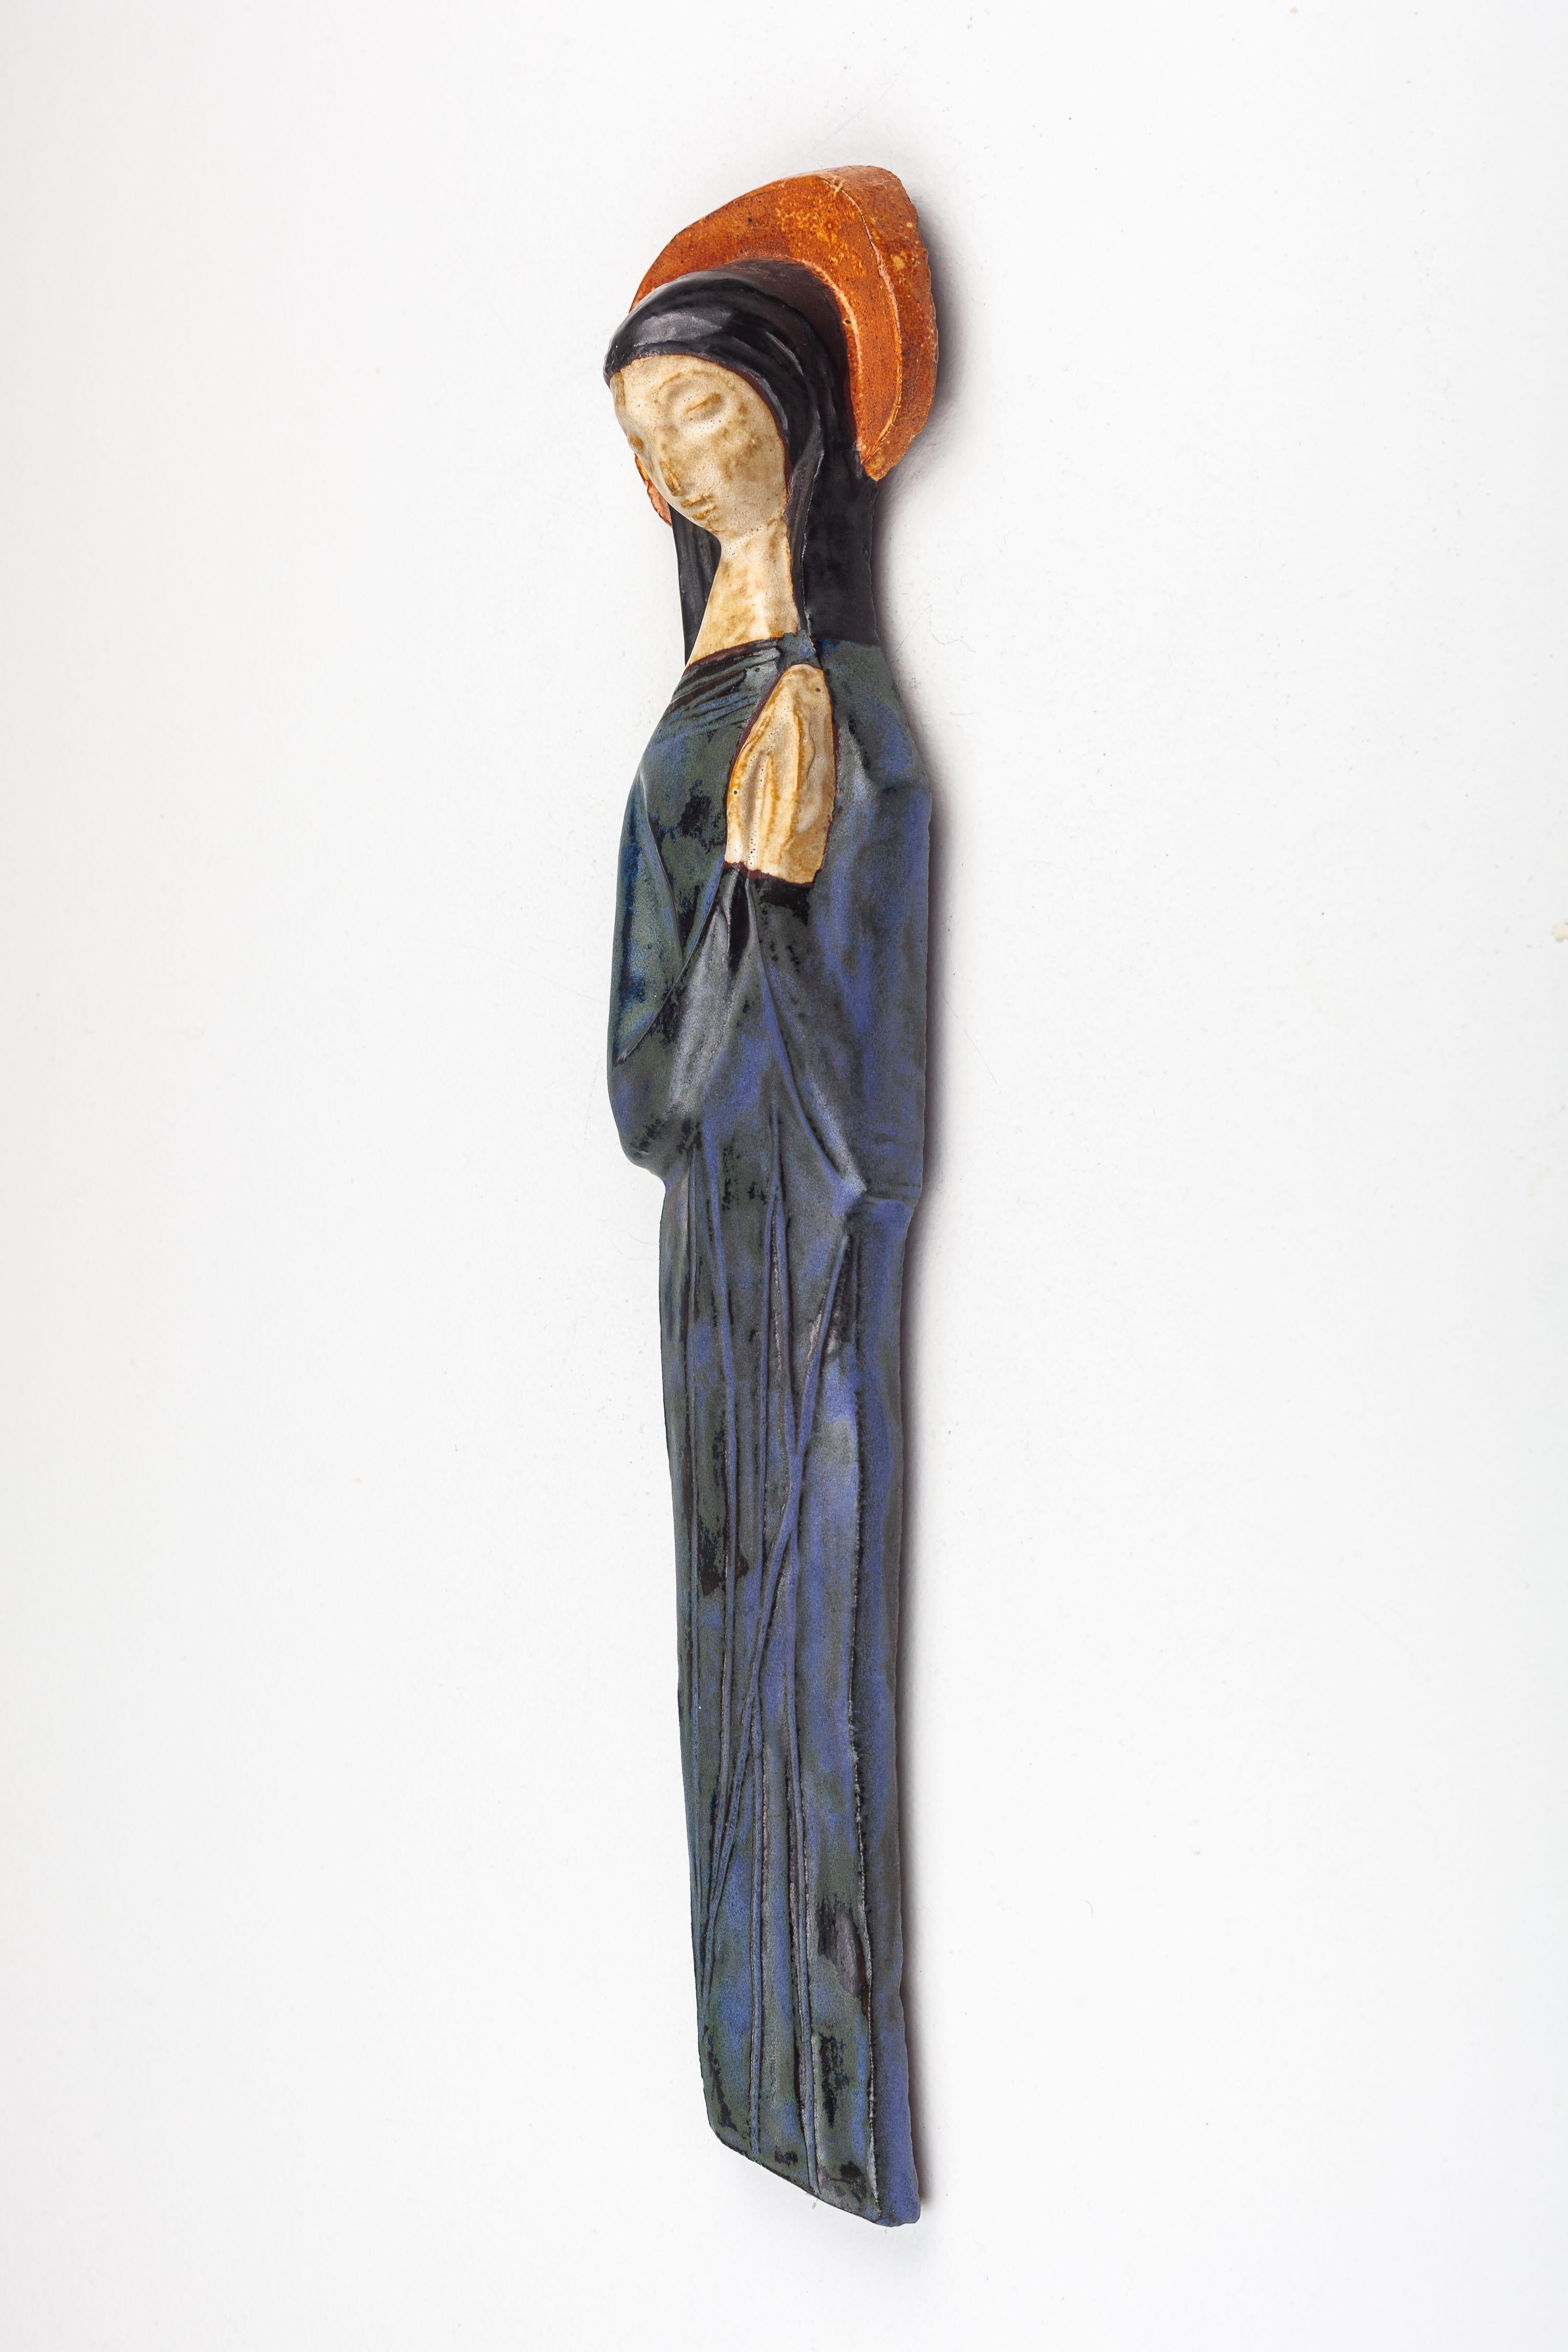 This mid-century modern ceramic sculpture portrays the Virgin Mary, a central figure in Christian iconography, handcrafted with a unique artistic interpretation by a European studio pottery artist. The figure is rendered with stylized simplicity,